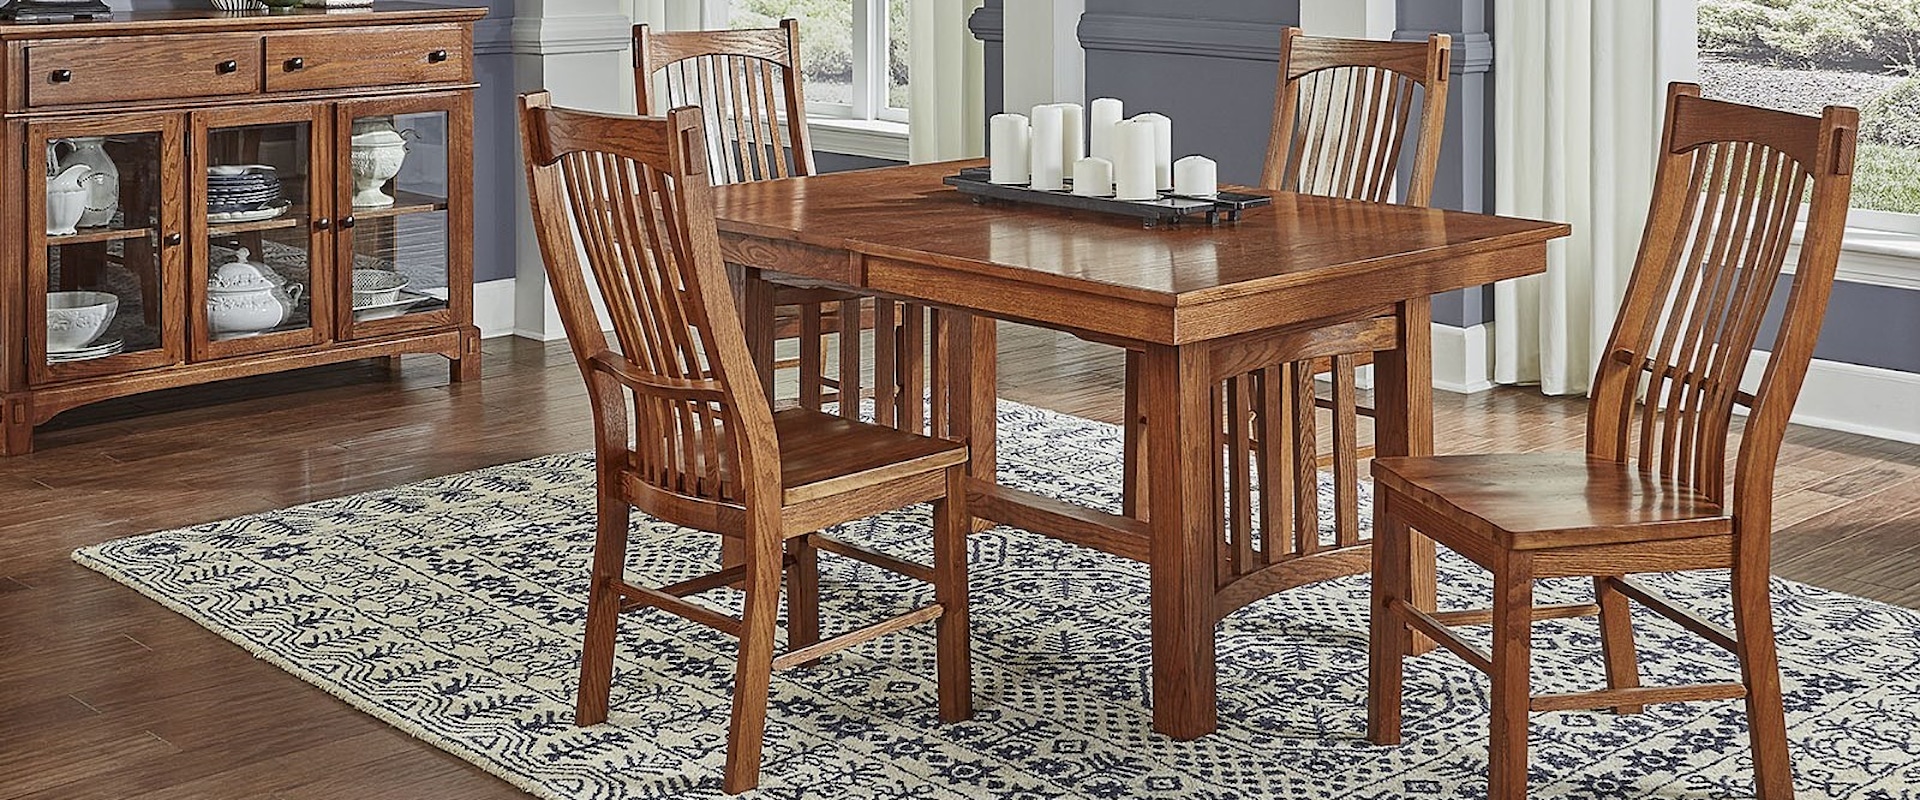 Rectangular 5-Piece Trestle Dining Table and Slat Back Chair Set